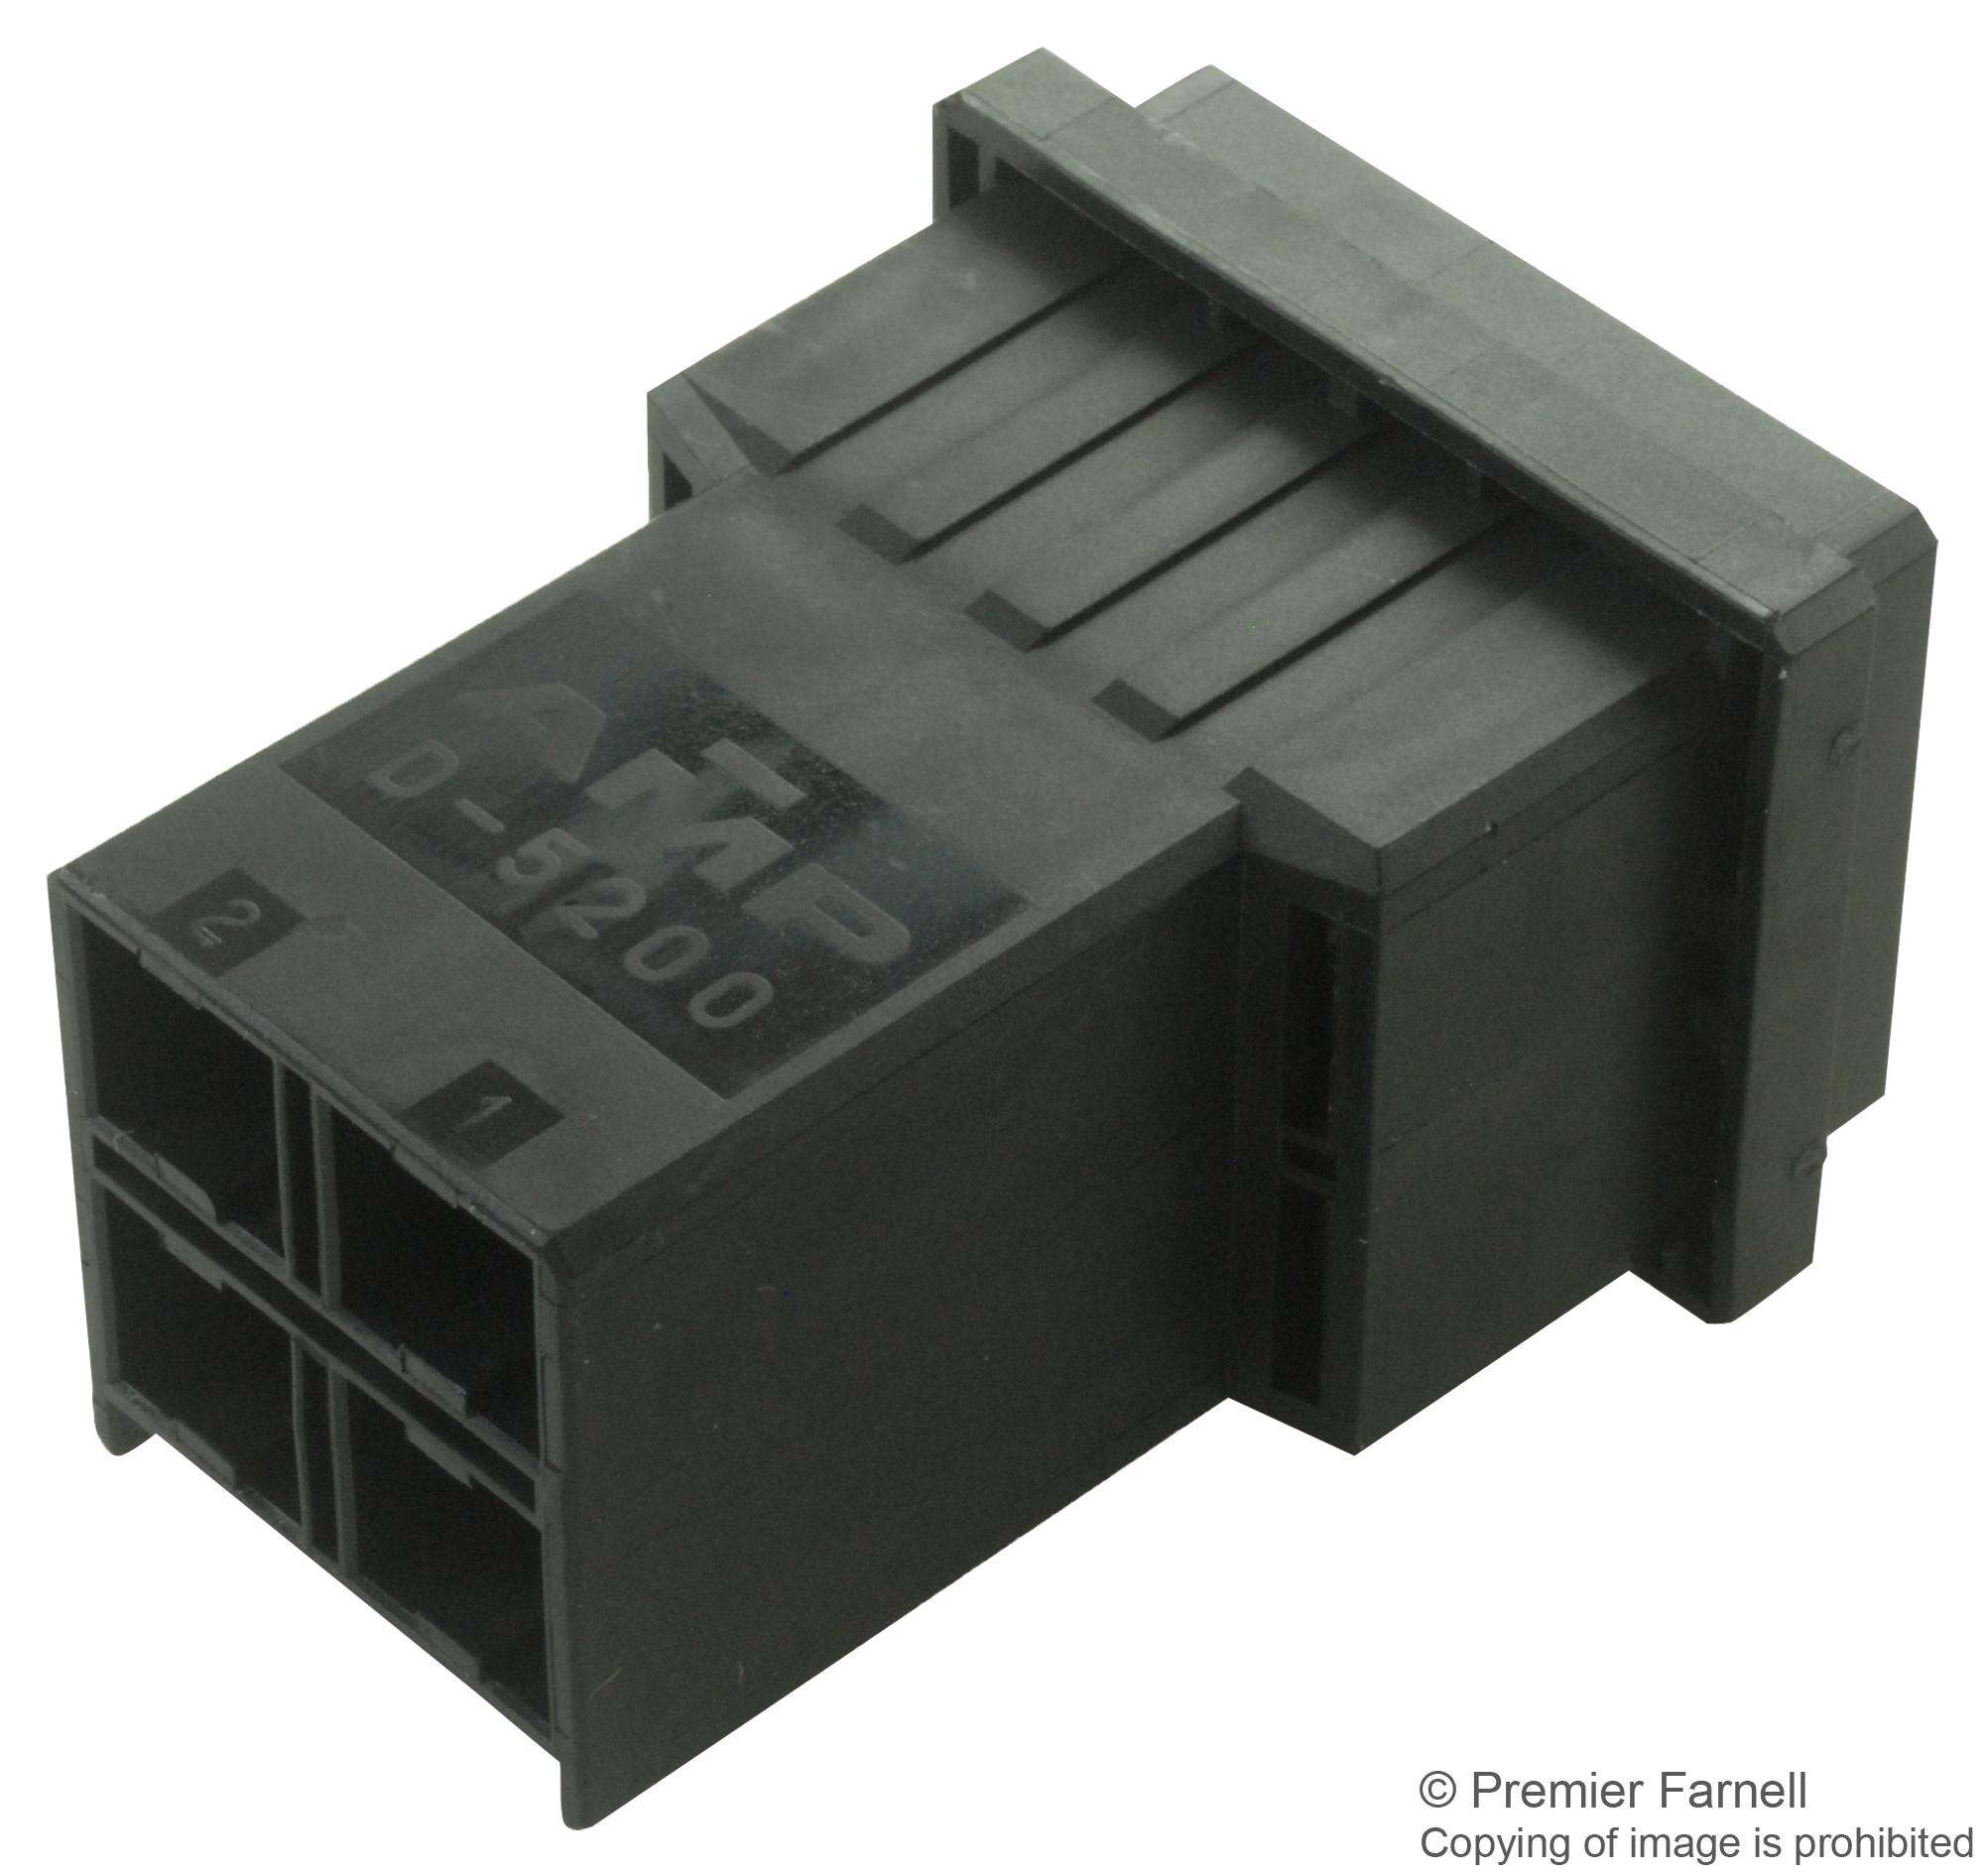 3-917809-2 CONNECTOR HOUSING, PLUG, 4POS, 10.16MM AMP - TE CONNECTIVITY